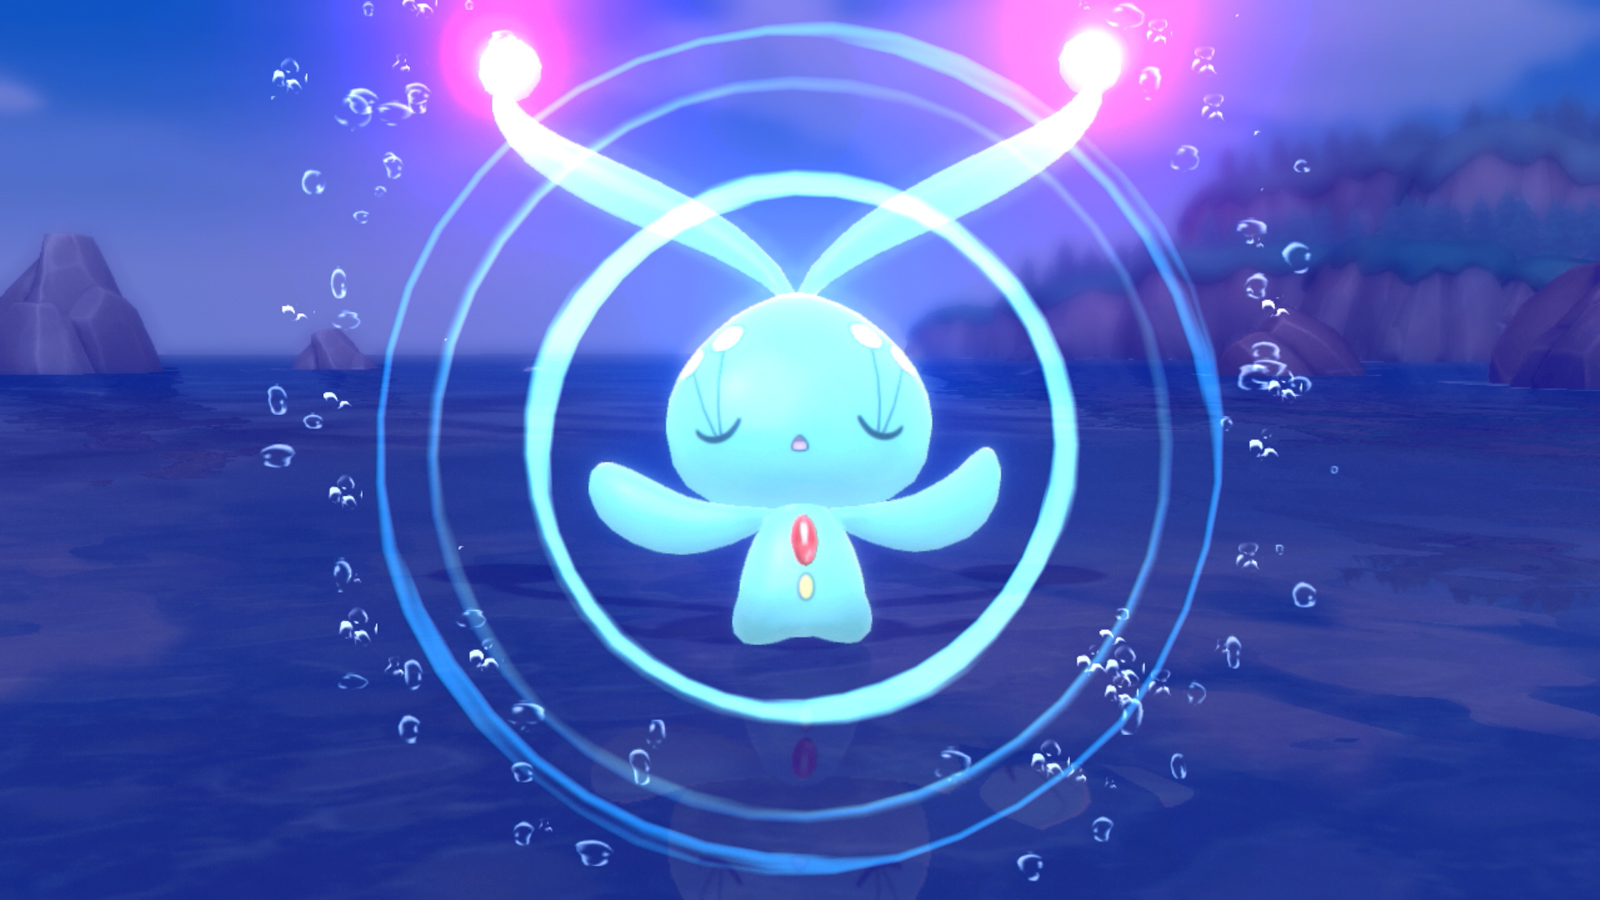 A Pokémon meditates and prepares for a move in Brilliant Diamond and Shining Pearl